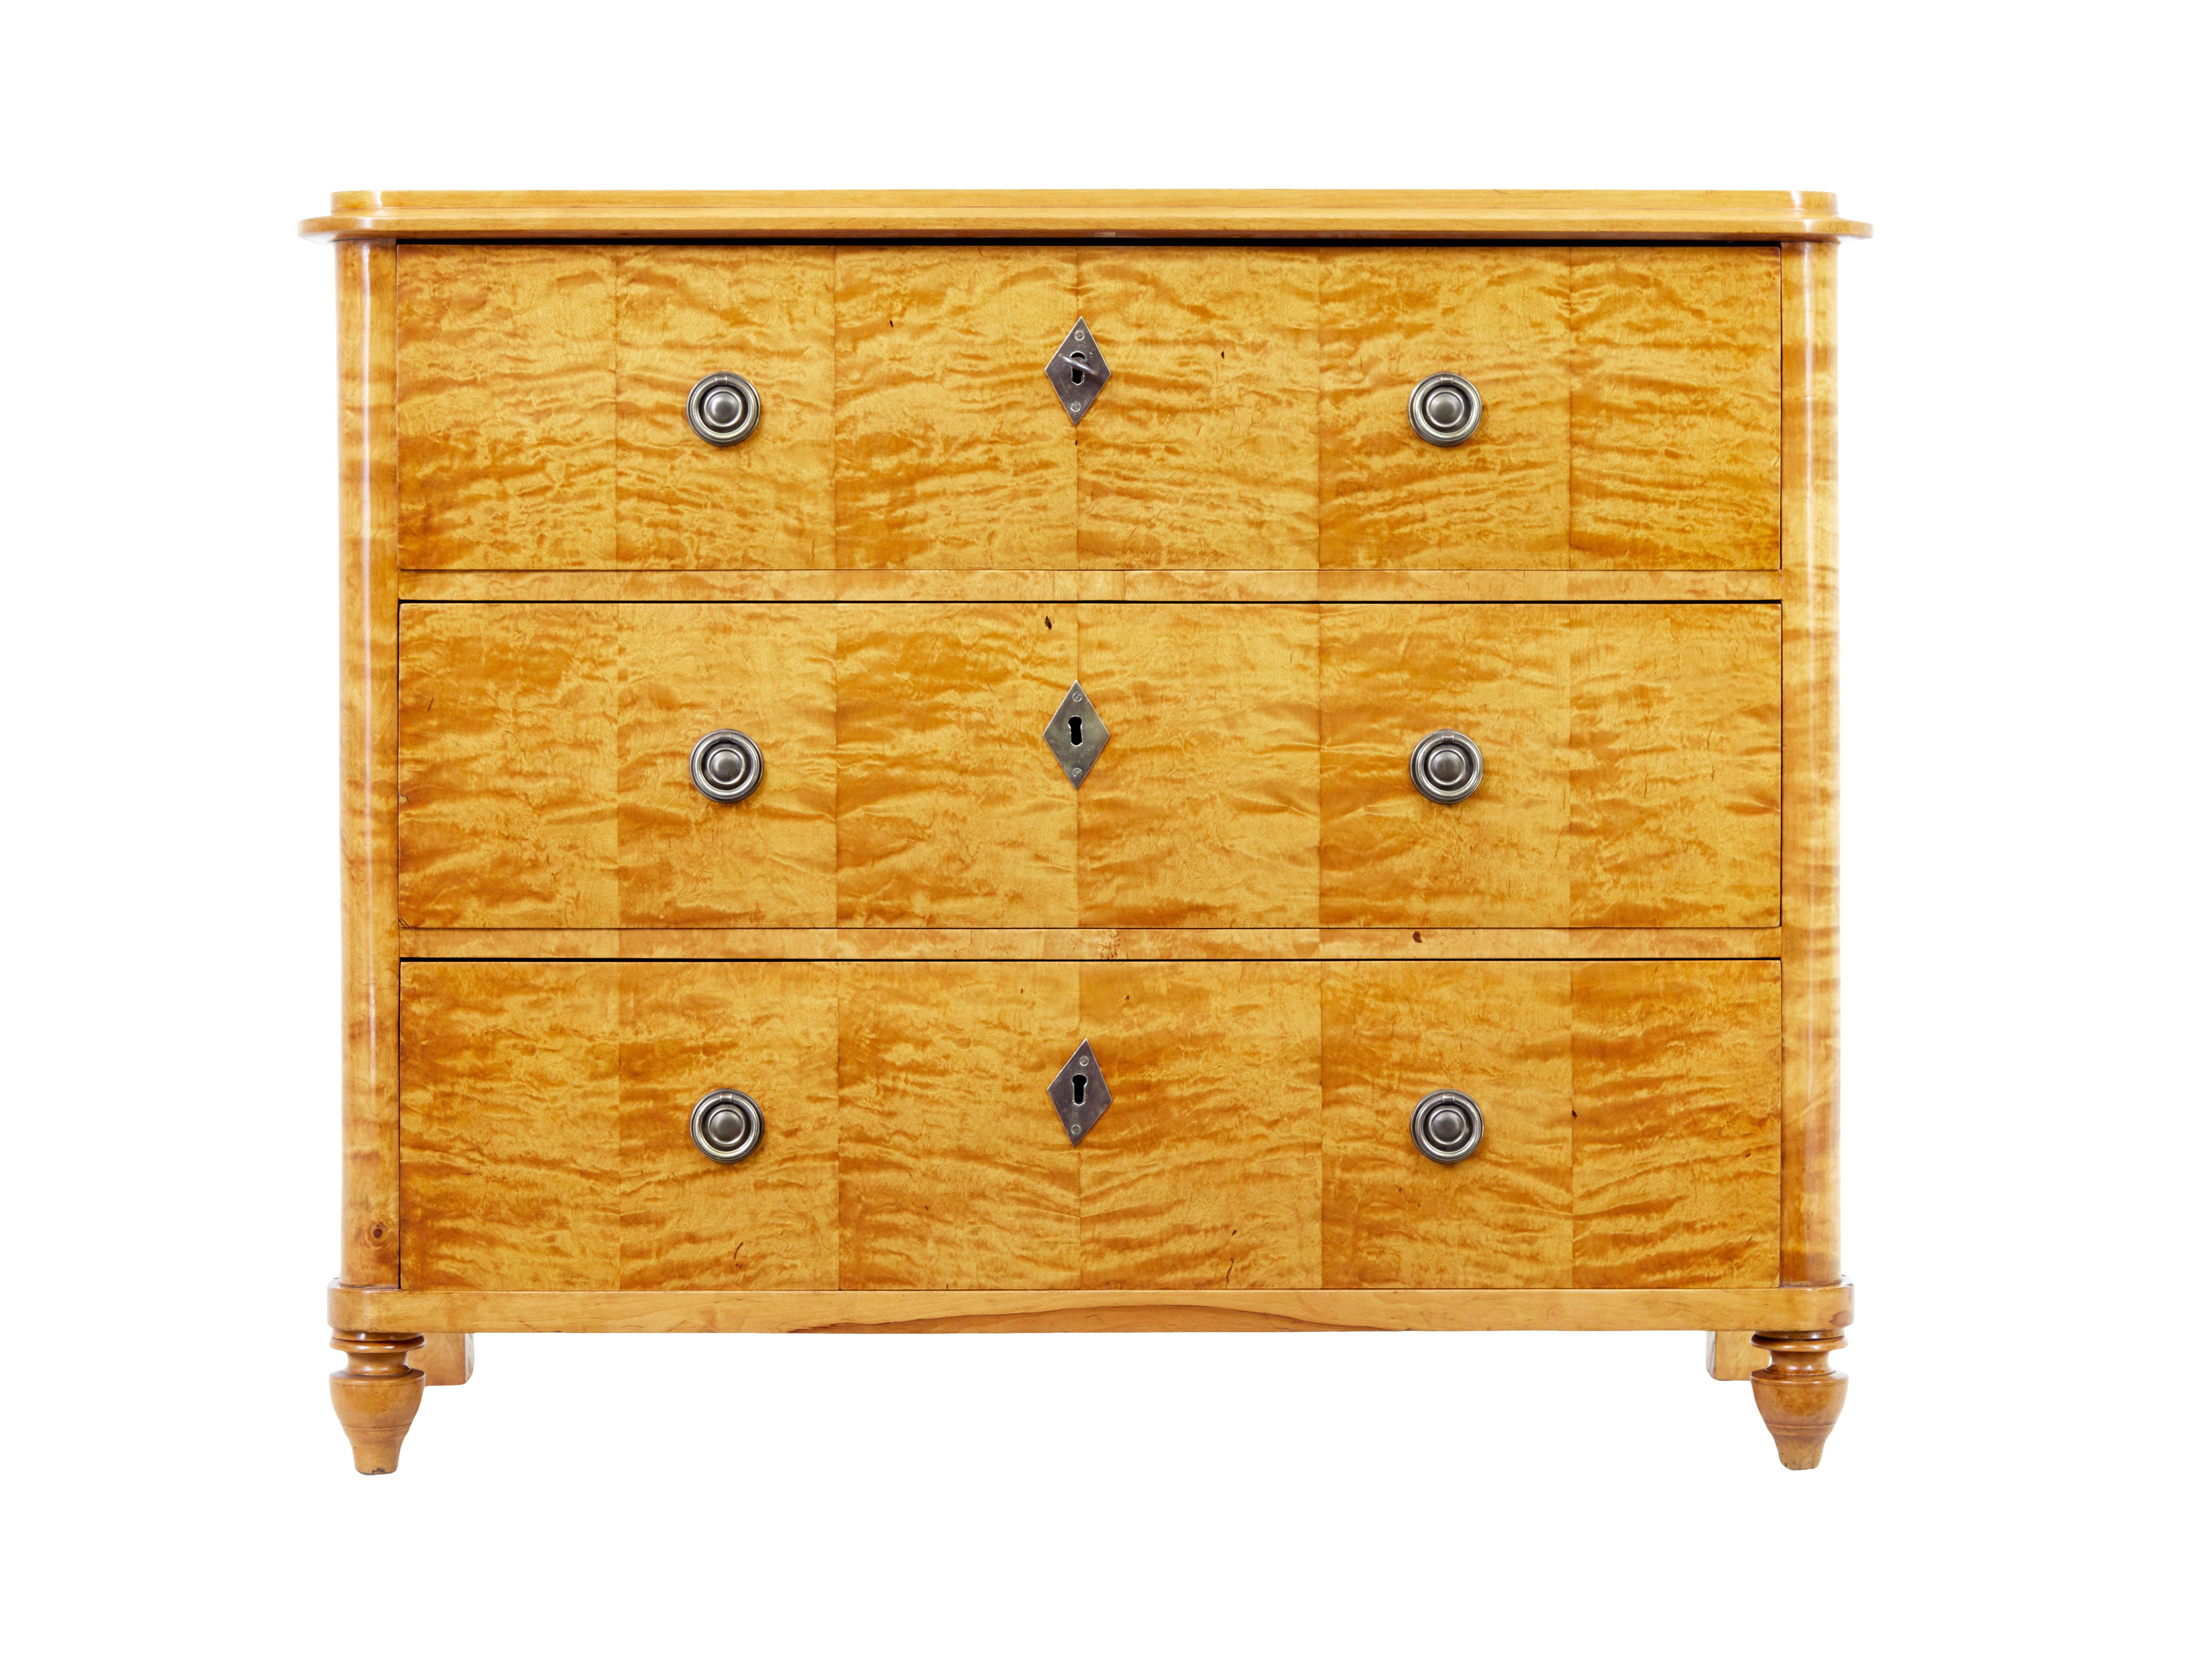 Mid 19th century Swedish birch chest of drawers circa 1850.

Good quality Swedish empire commode made in birch and pine,

Rectangular top with rounded corners and moulded edge.  Below which are 3 drawers of equal proportions, fitted with ring